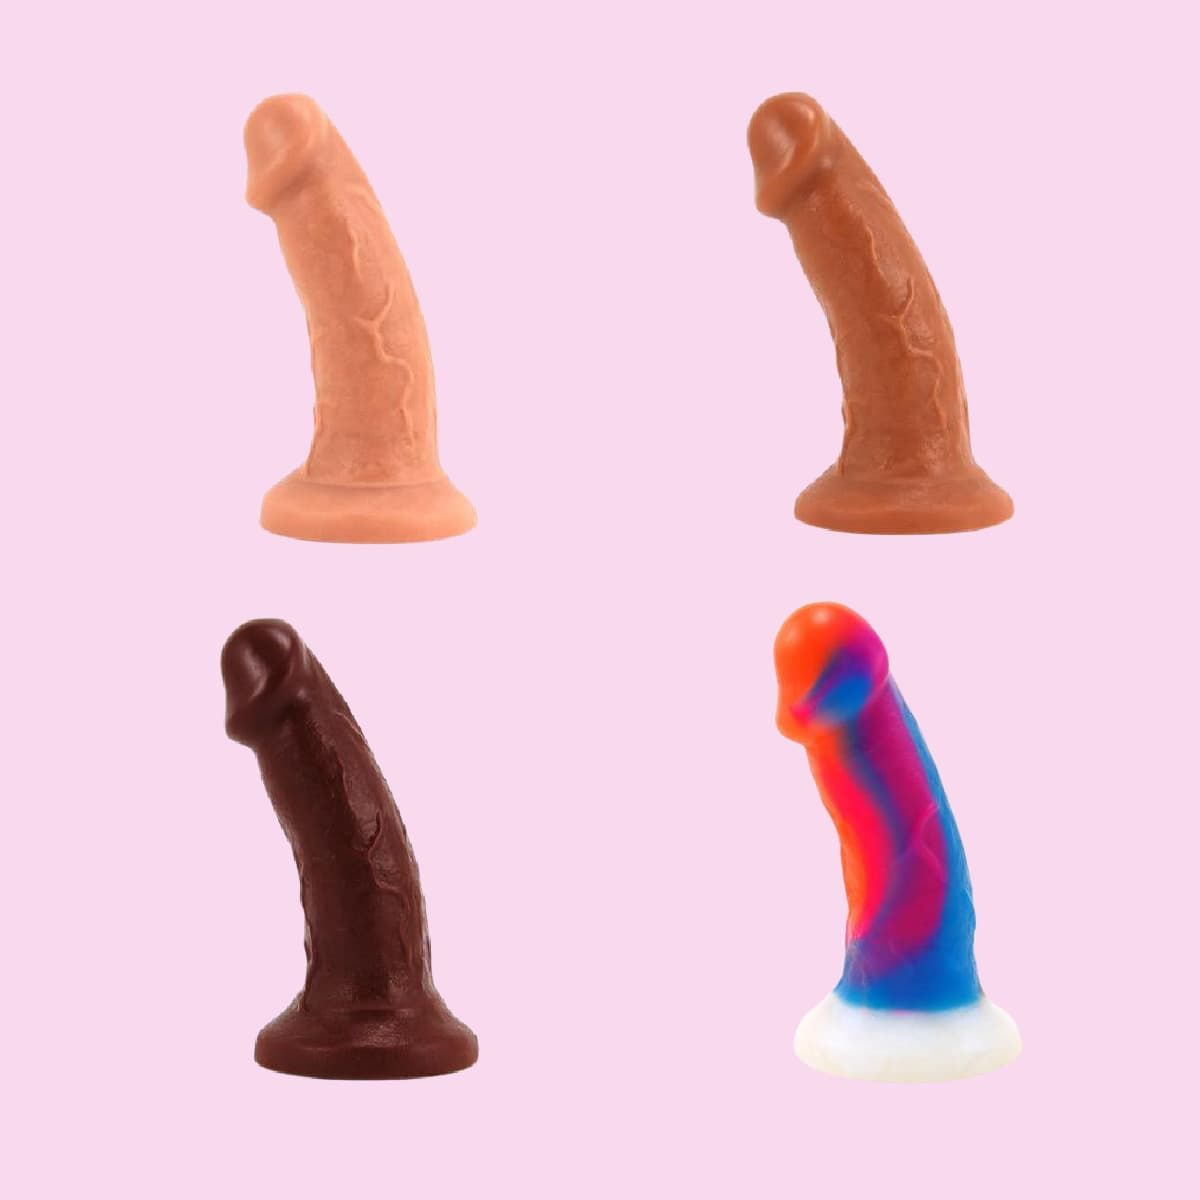 HUGE Dildos Realistic Sex Toys For Women Big Penis Large Harness